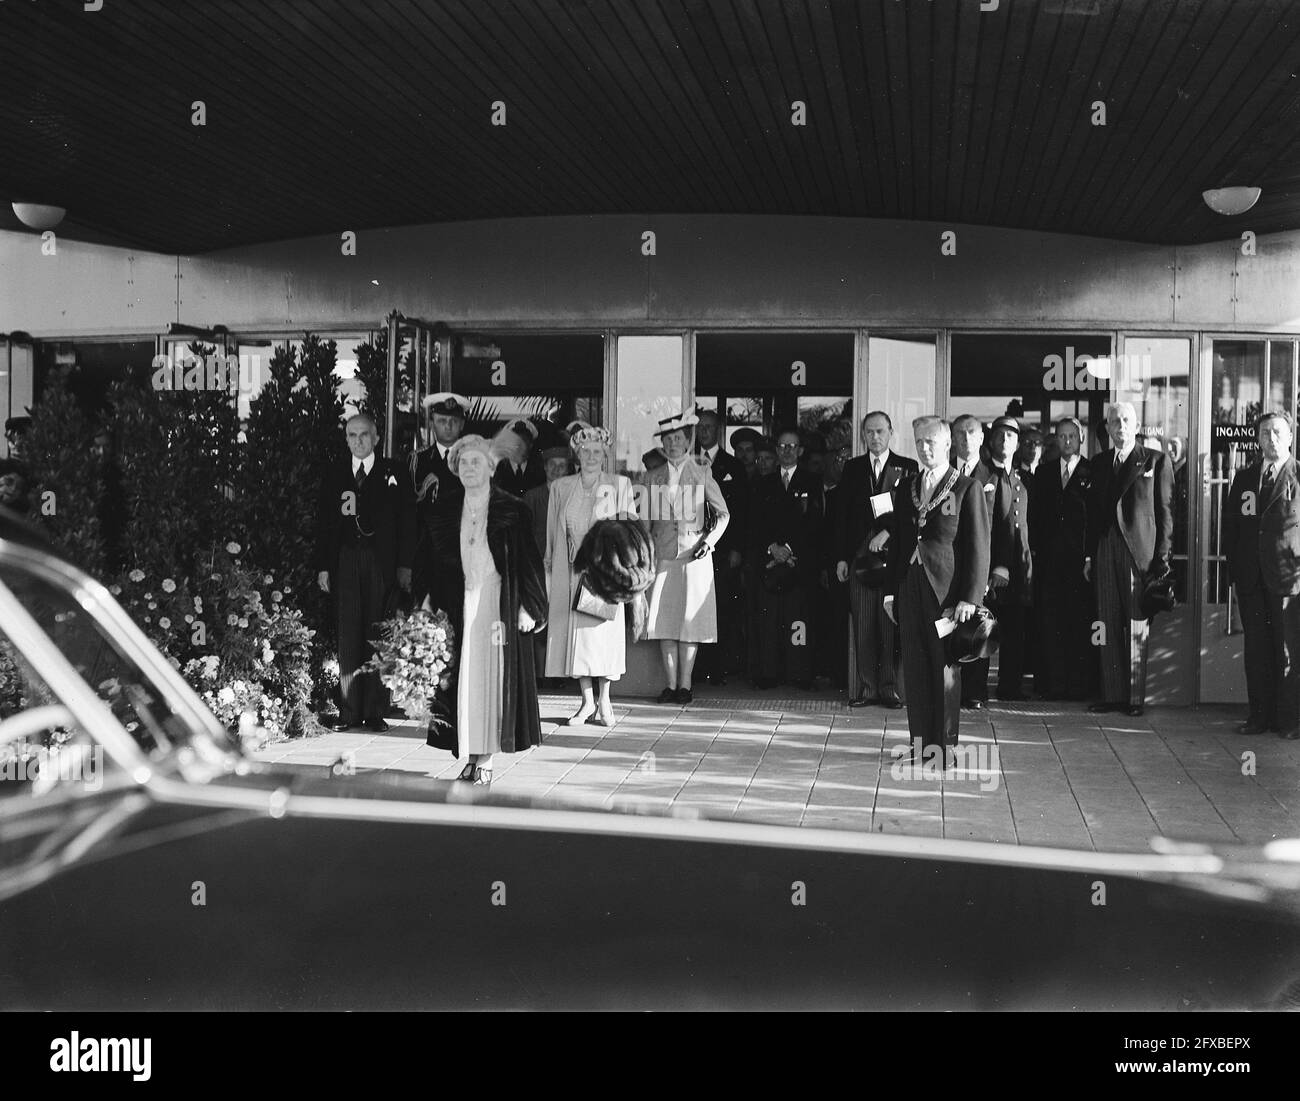 Entry into Amsterdam, for the last time as reigning monarch.Departure from Amstel Station., 30 August 1948, anniversaries, royal family, railroads, The Netherlands, 20th century press agency photo, news to remember, documentary, historic photography 1945-1990, visual stories, human history of the Twentieth Century, capturing moments in time Stock Photo